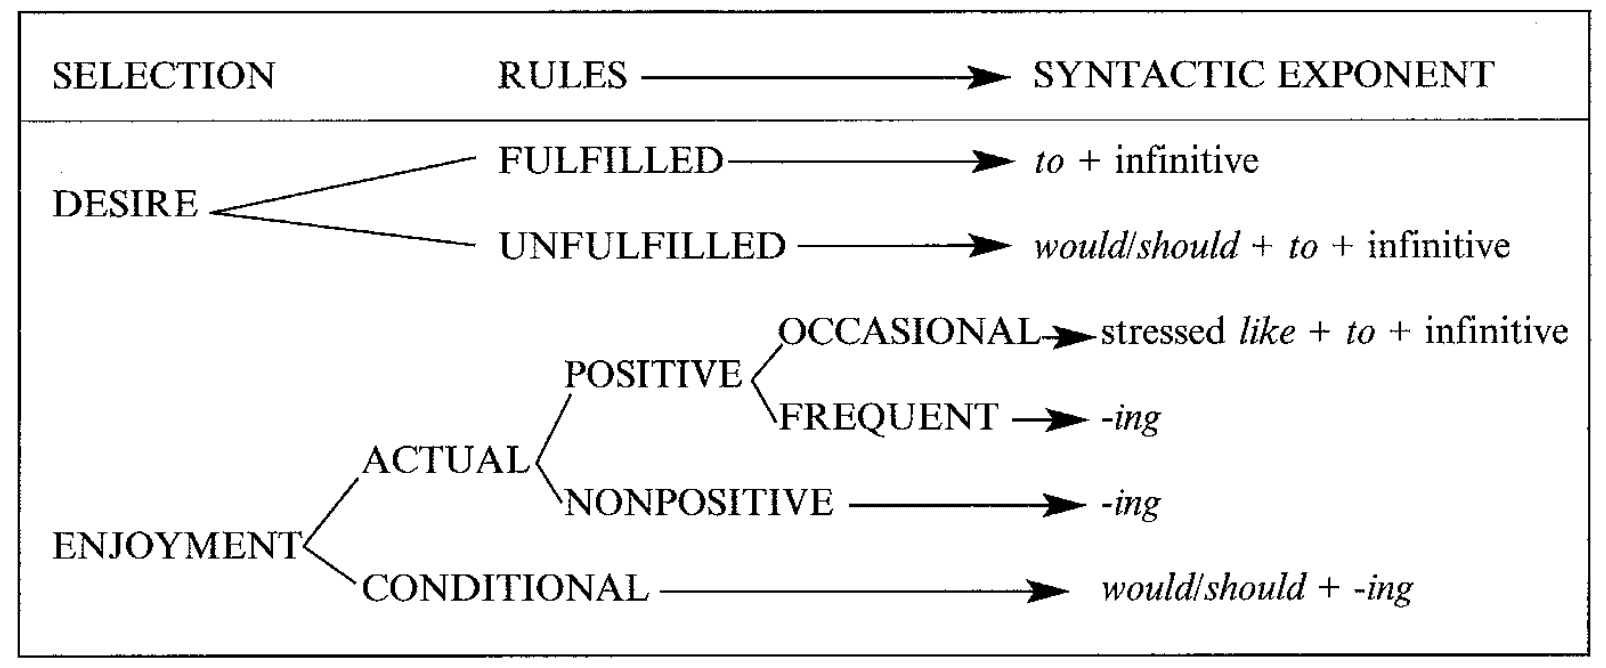 Selection rules for gerund and to-infinitive syntactic exponents